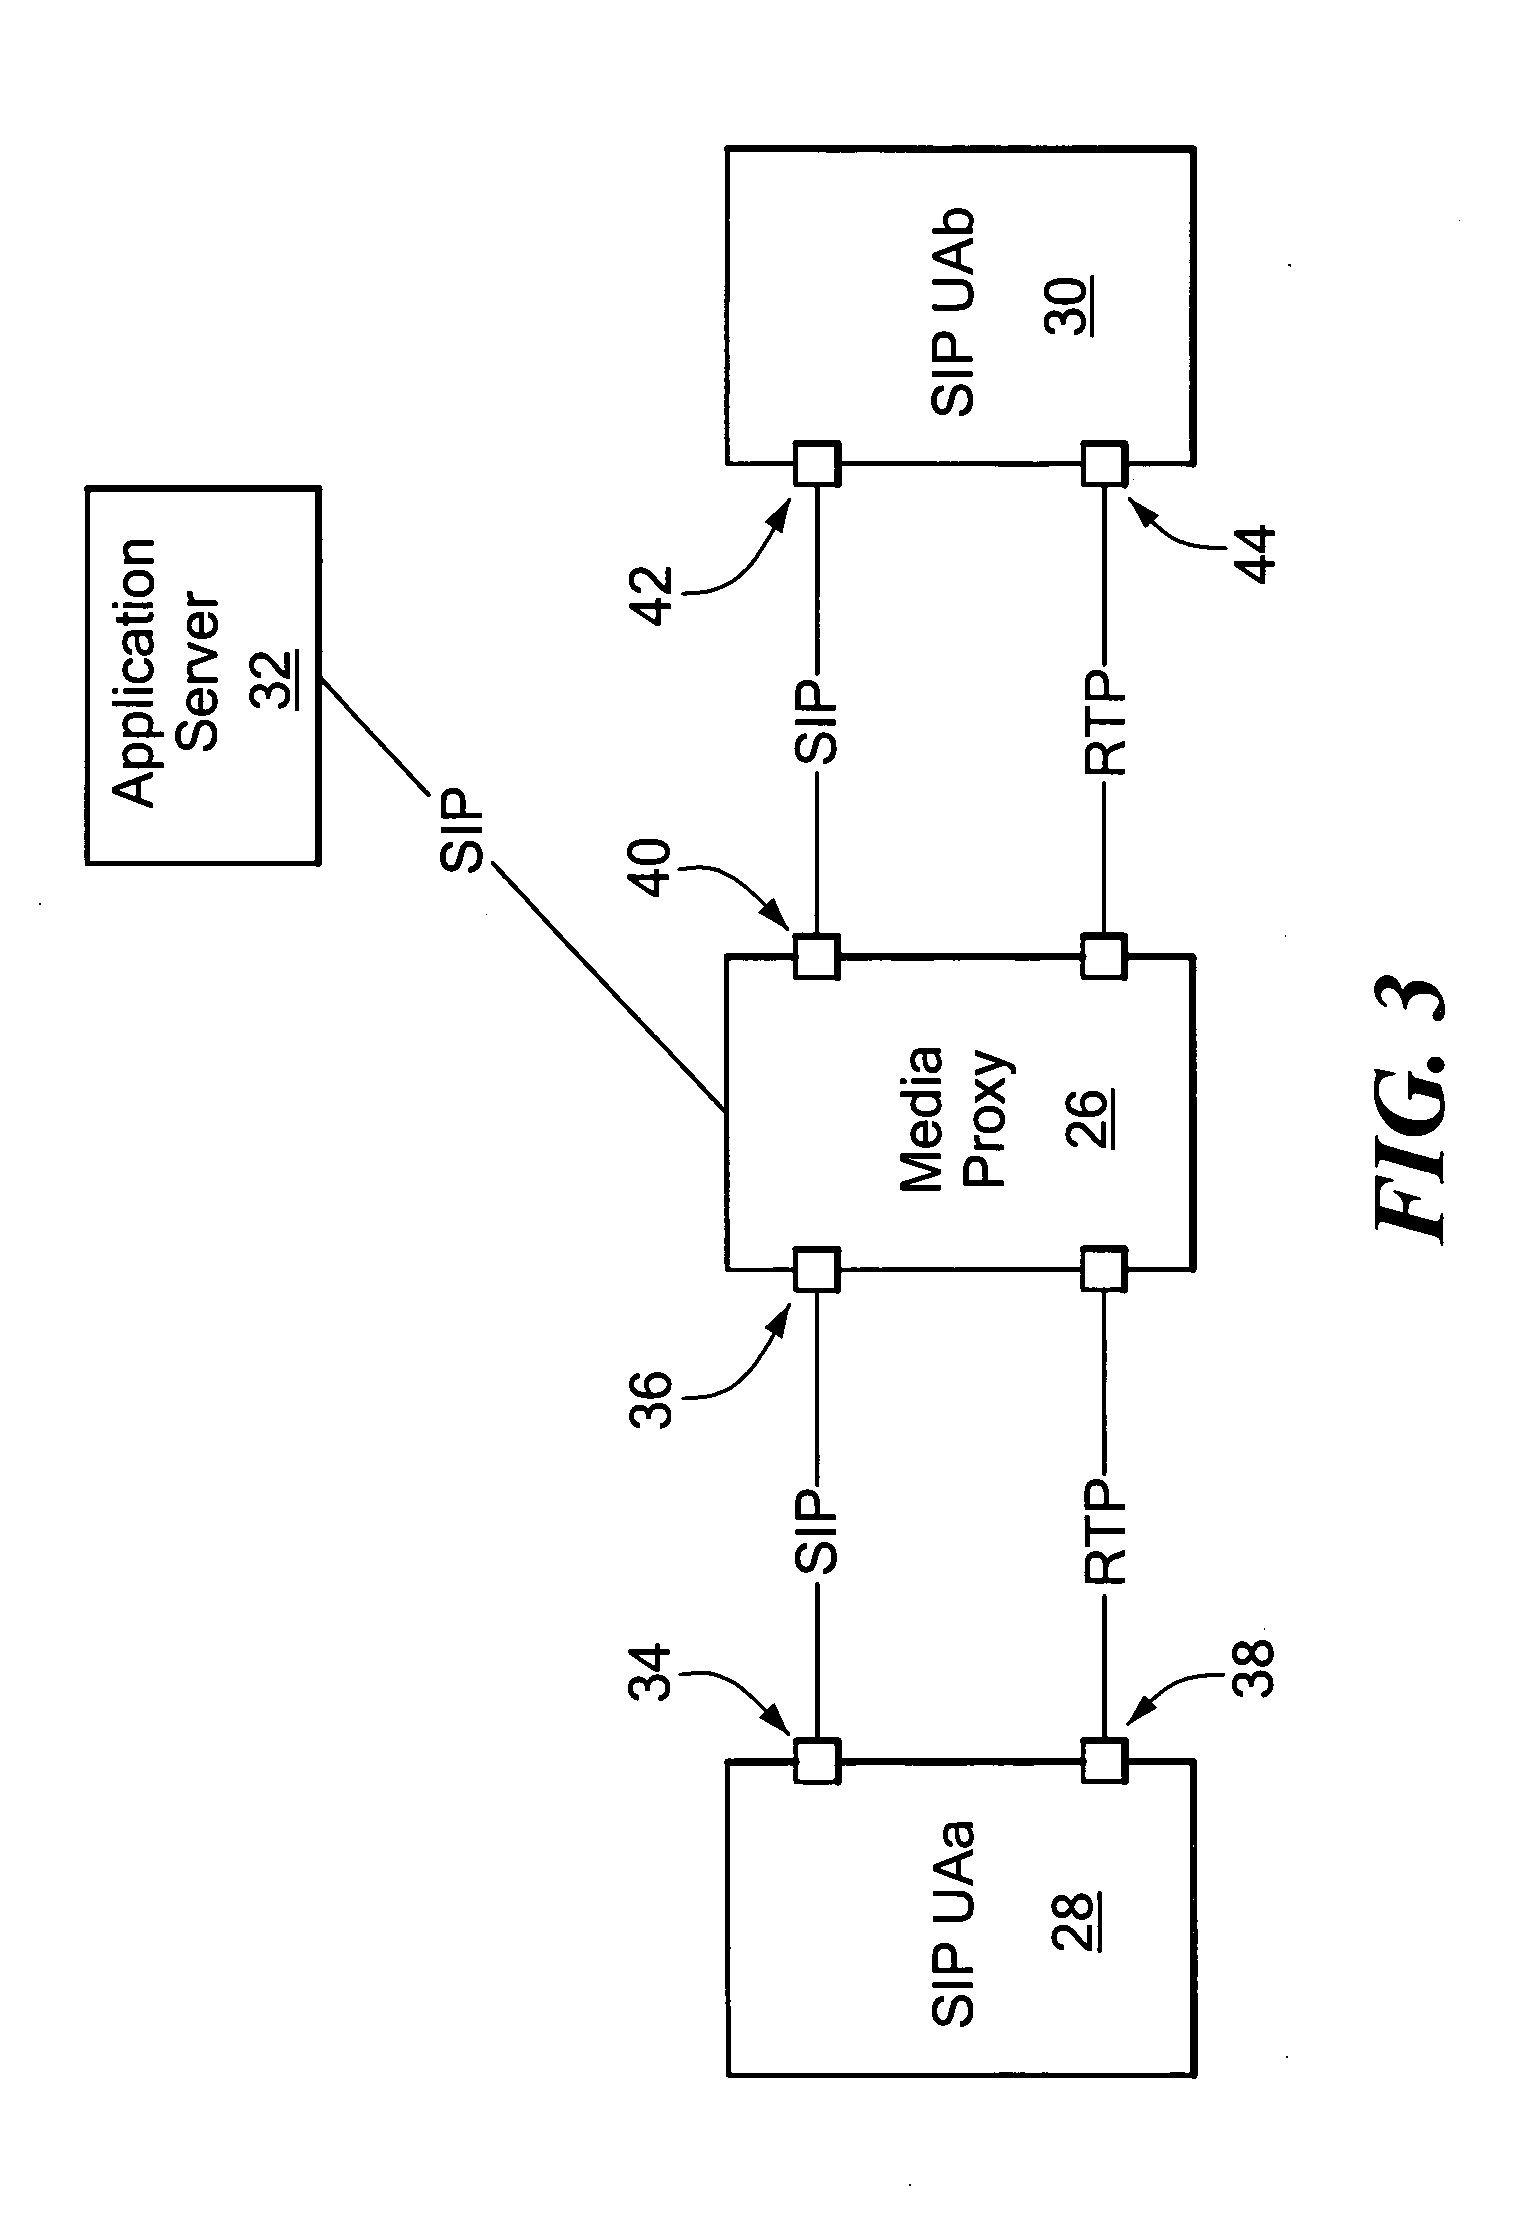 System and method for providing user input information to multiple independent, concurrent applications